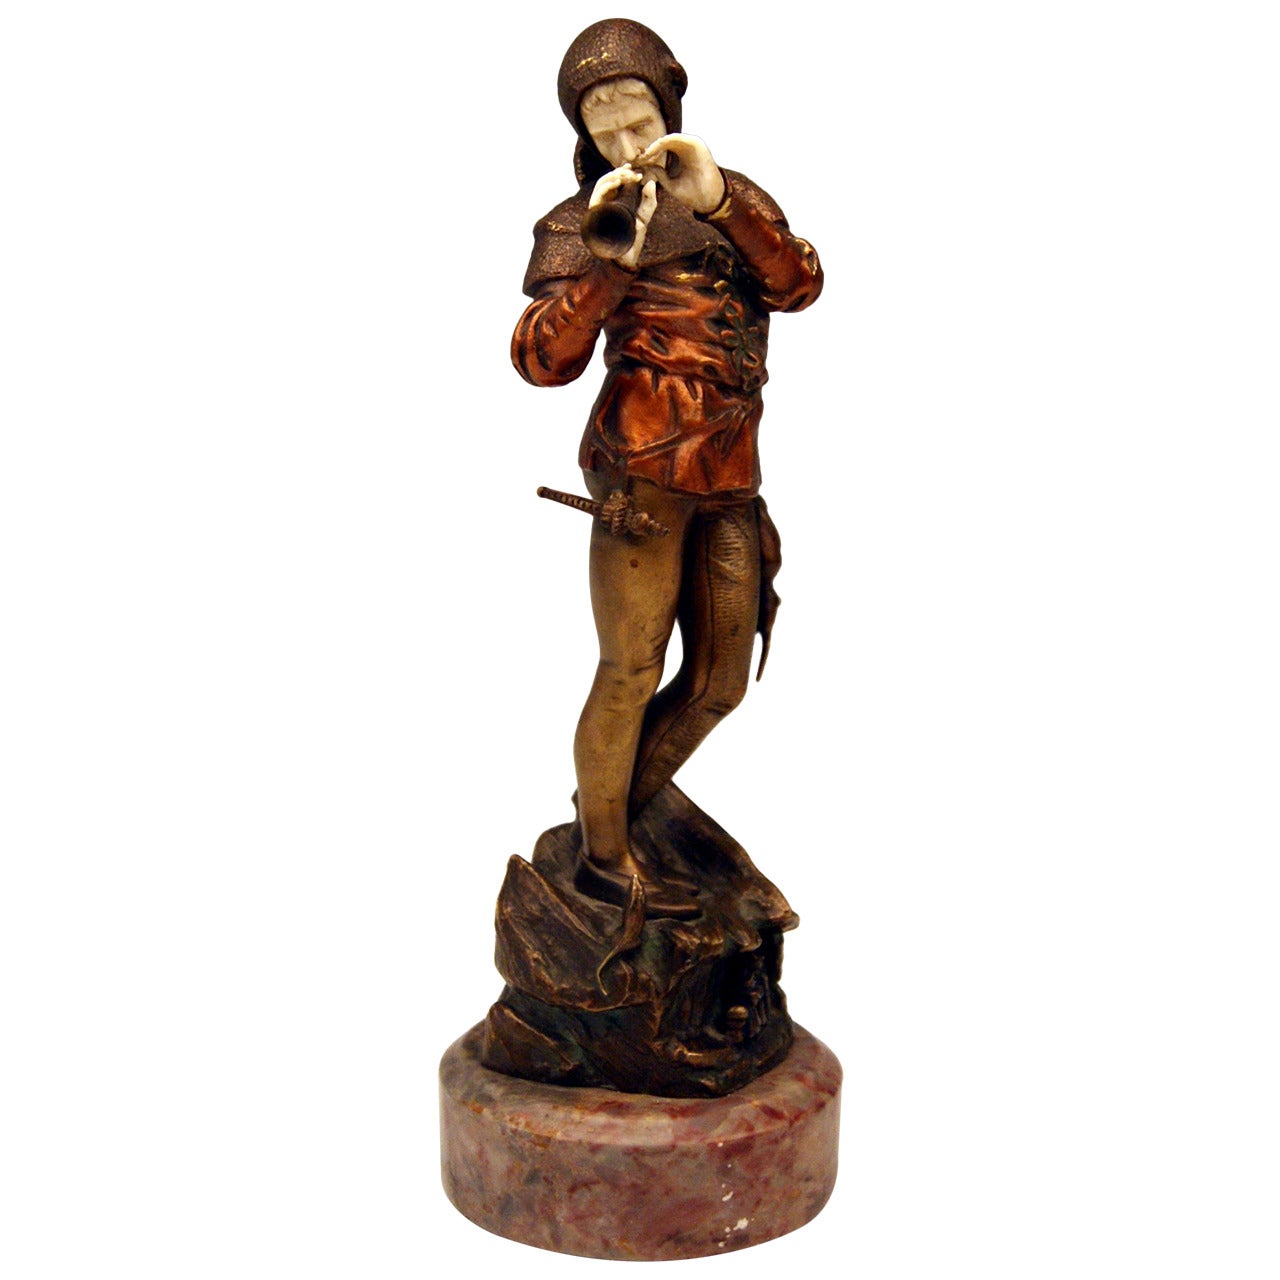 French Bronze Vintage Pied Piper of Hamelin by Eugène Barillot, circa 1890